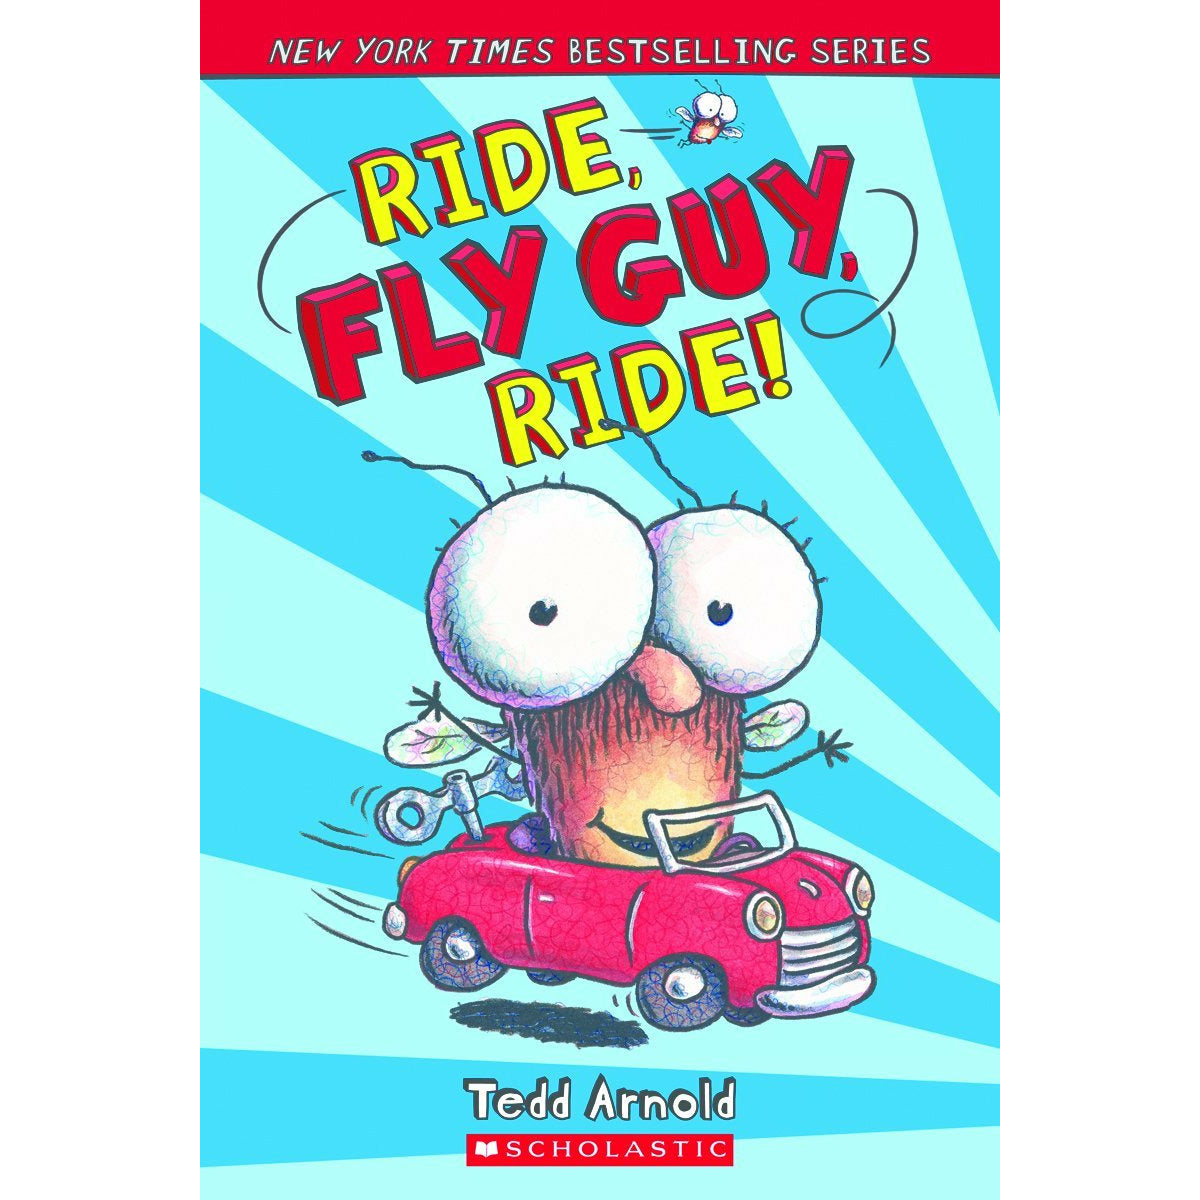 fly guy book cover